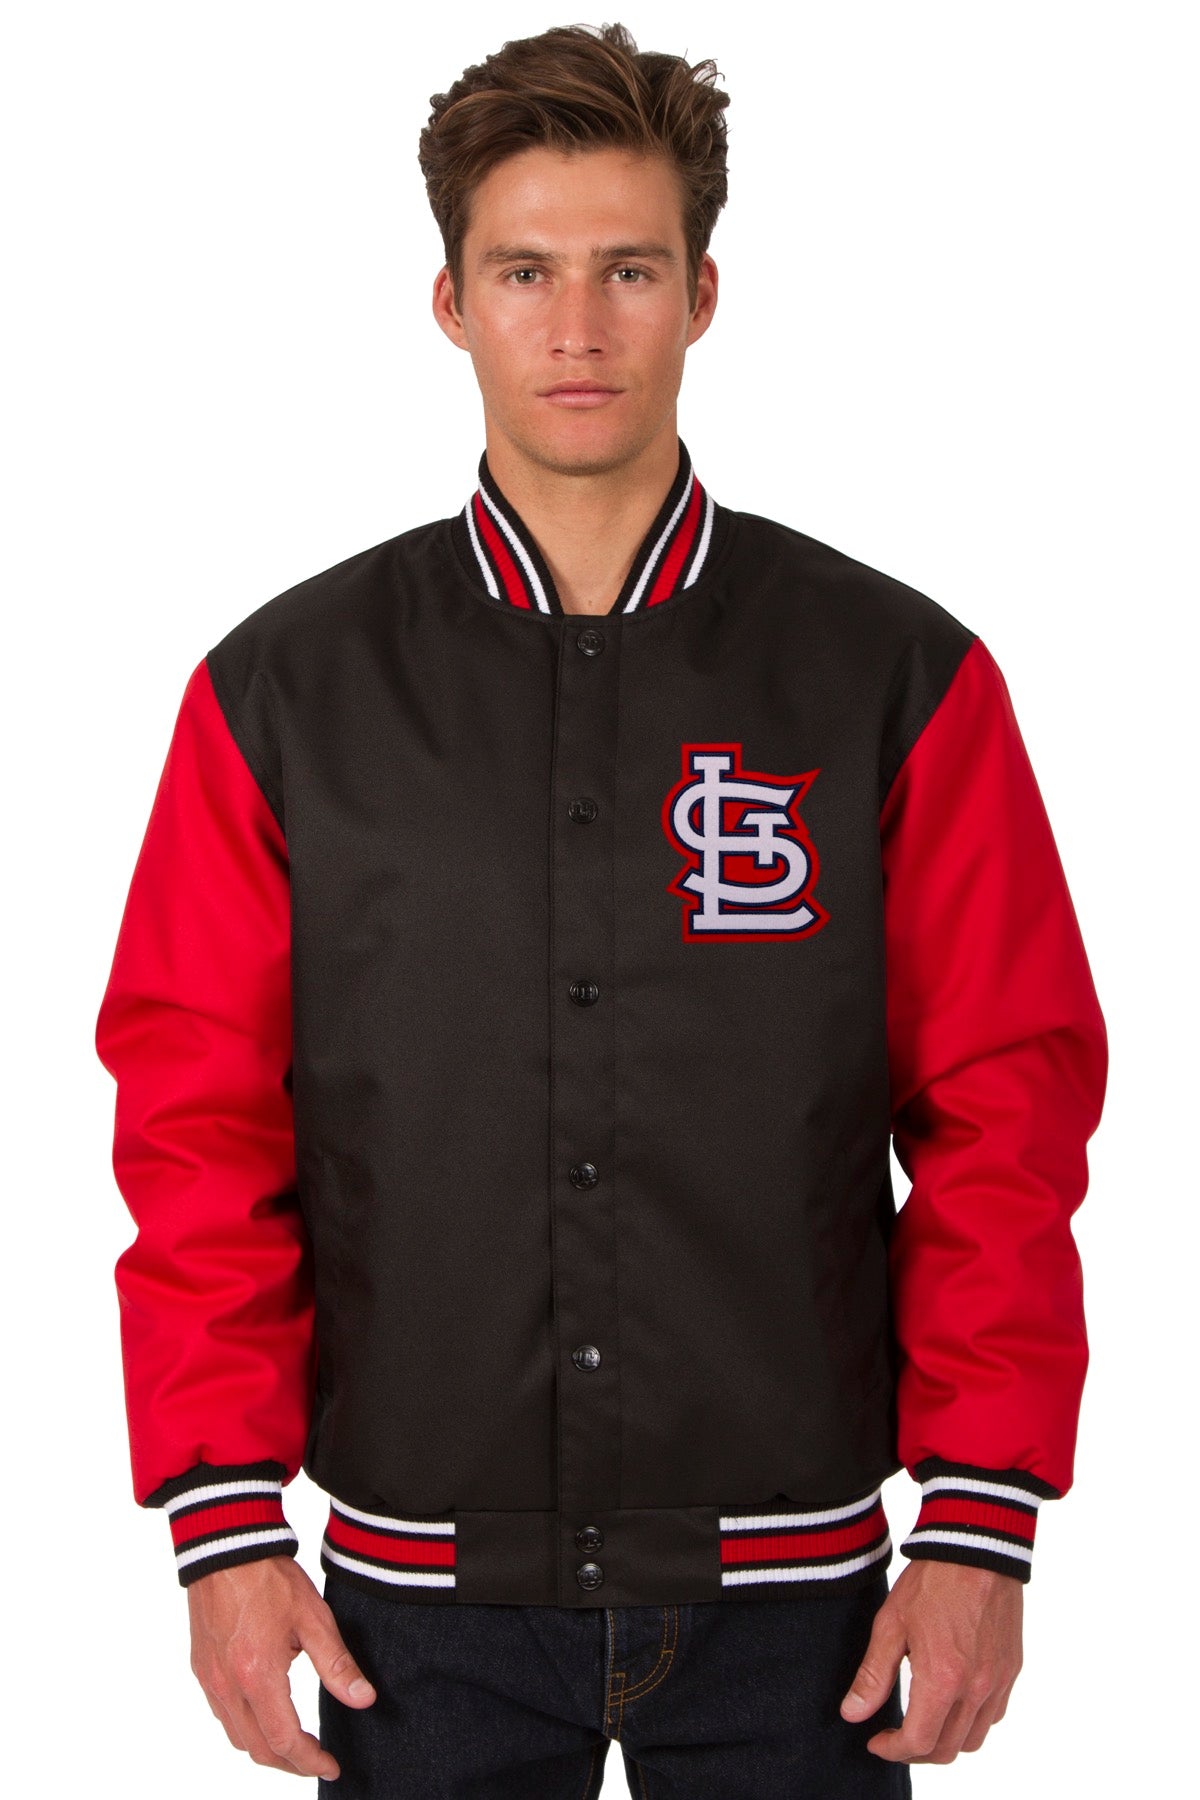 St. Louis Cardinals Poly Twill Varsity Jacket - Black/Red